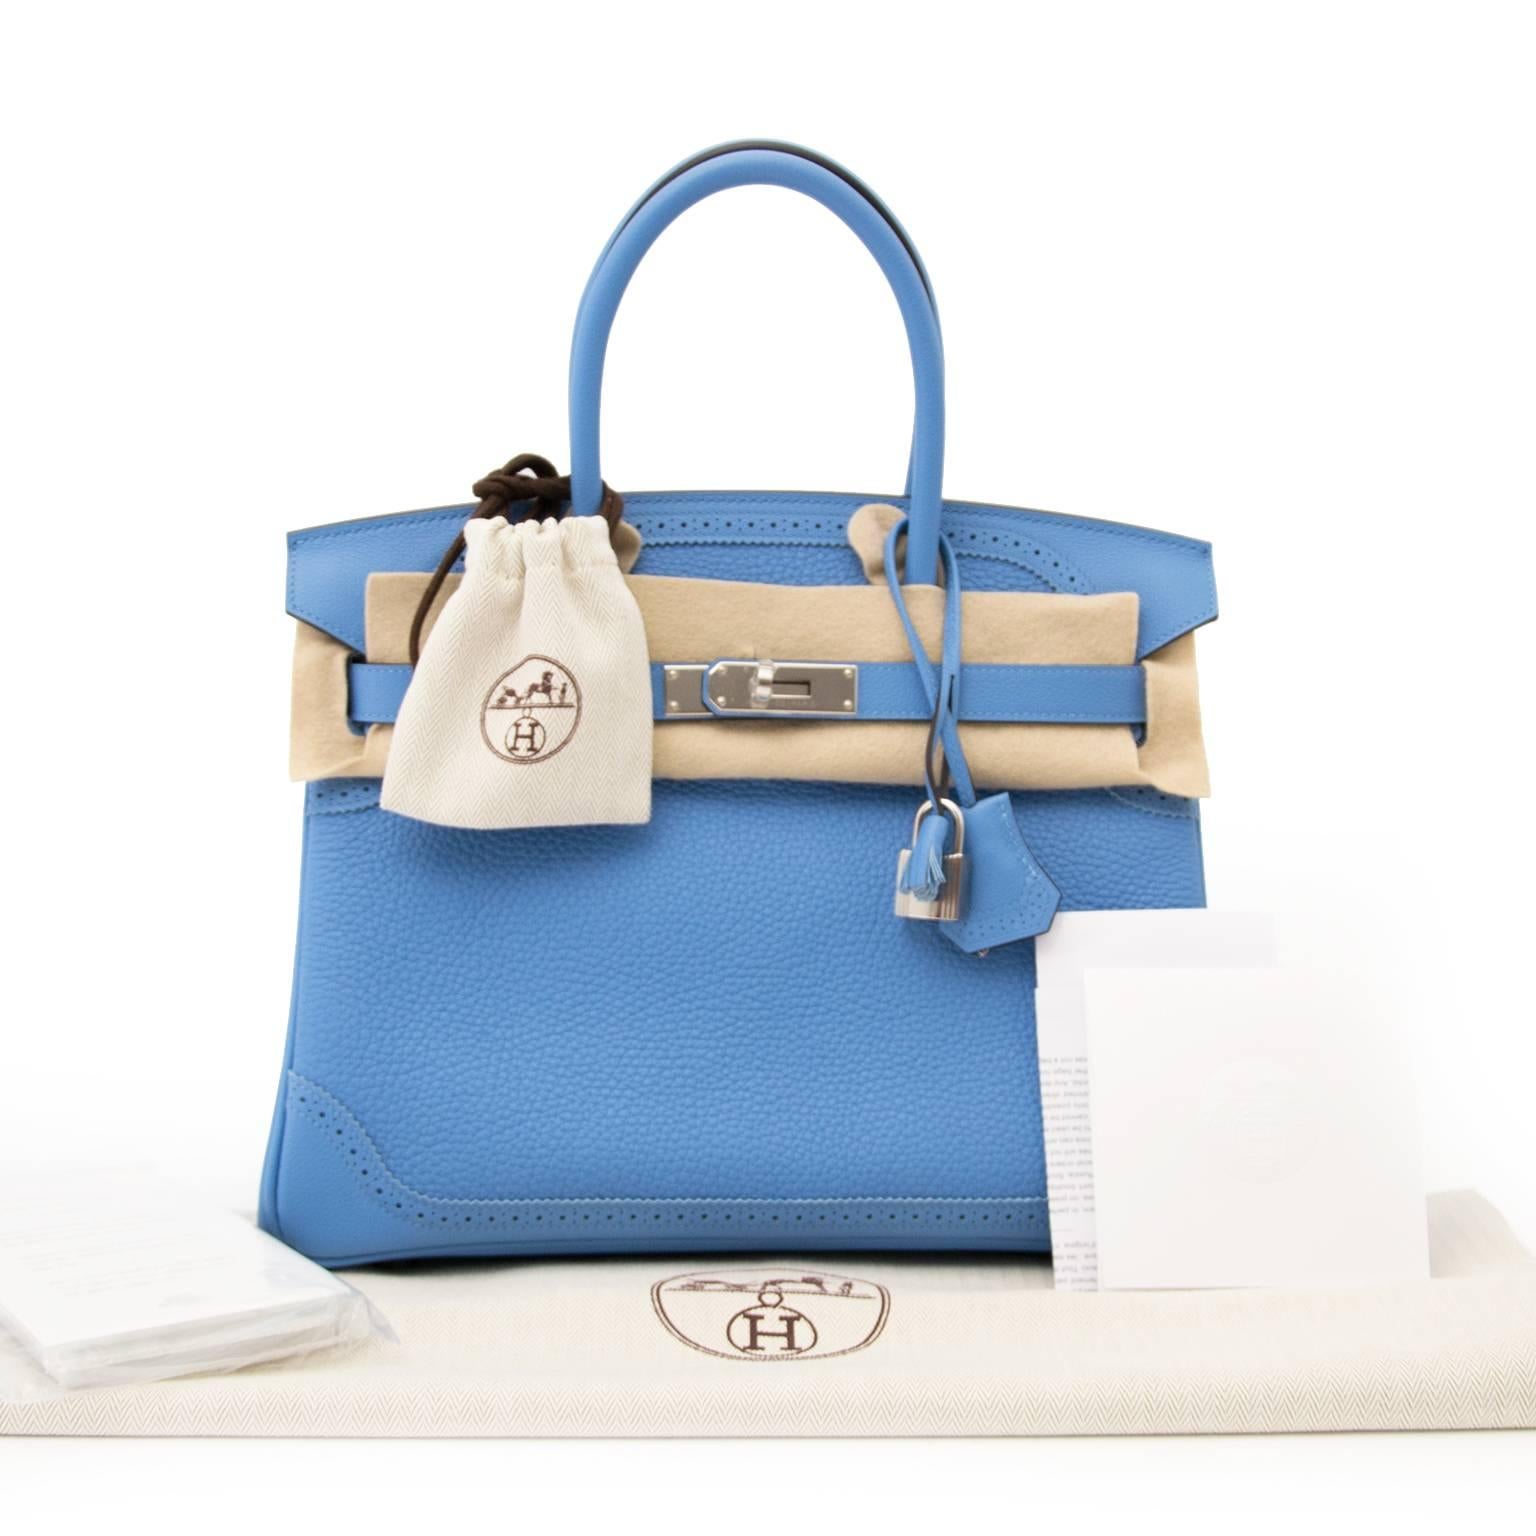 Brand new hard to find Hermes Birkin Ghillies Veu Paradis Taurillon Clamence .
This stunning Ghillies Birkin tote is beautifully crafted out of taurillon clemence leather.  
A soft, buttery calfskin with a nice even grain. Clemence leather is